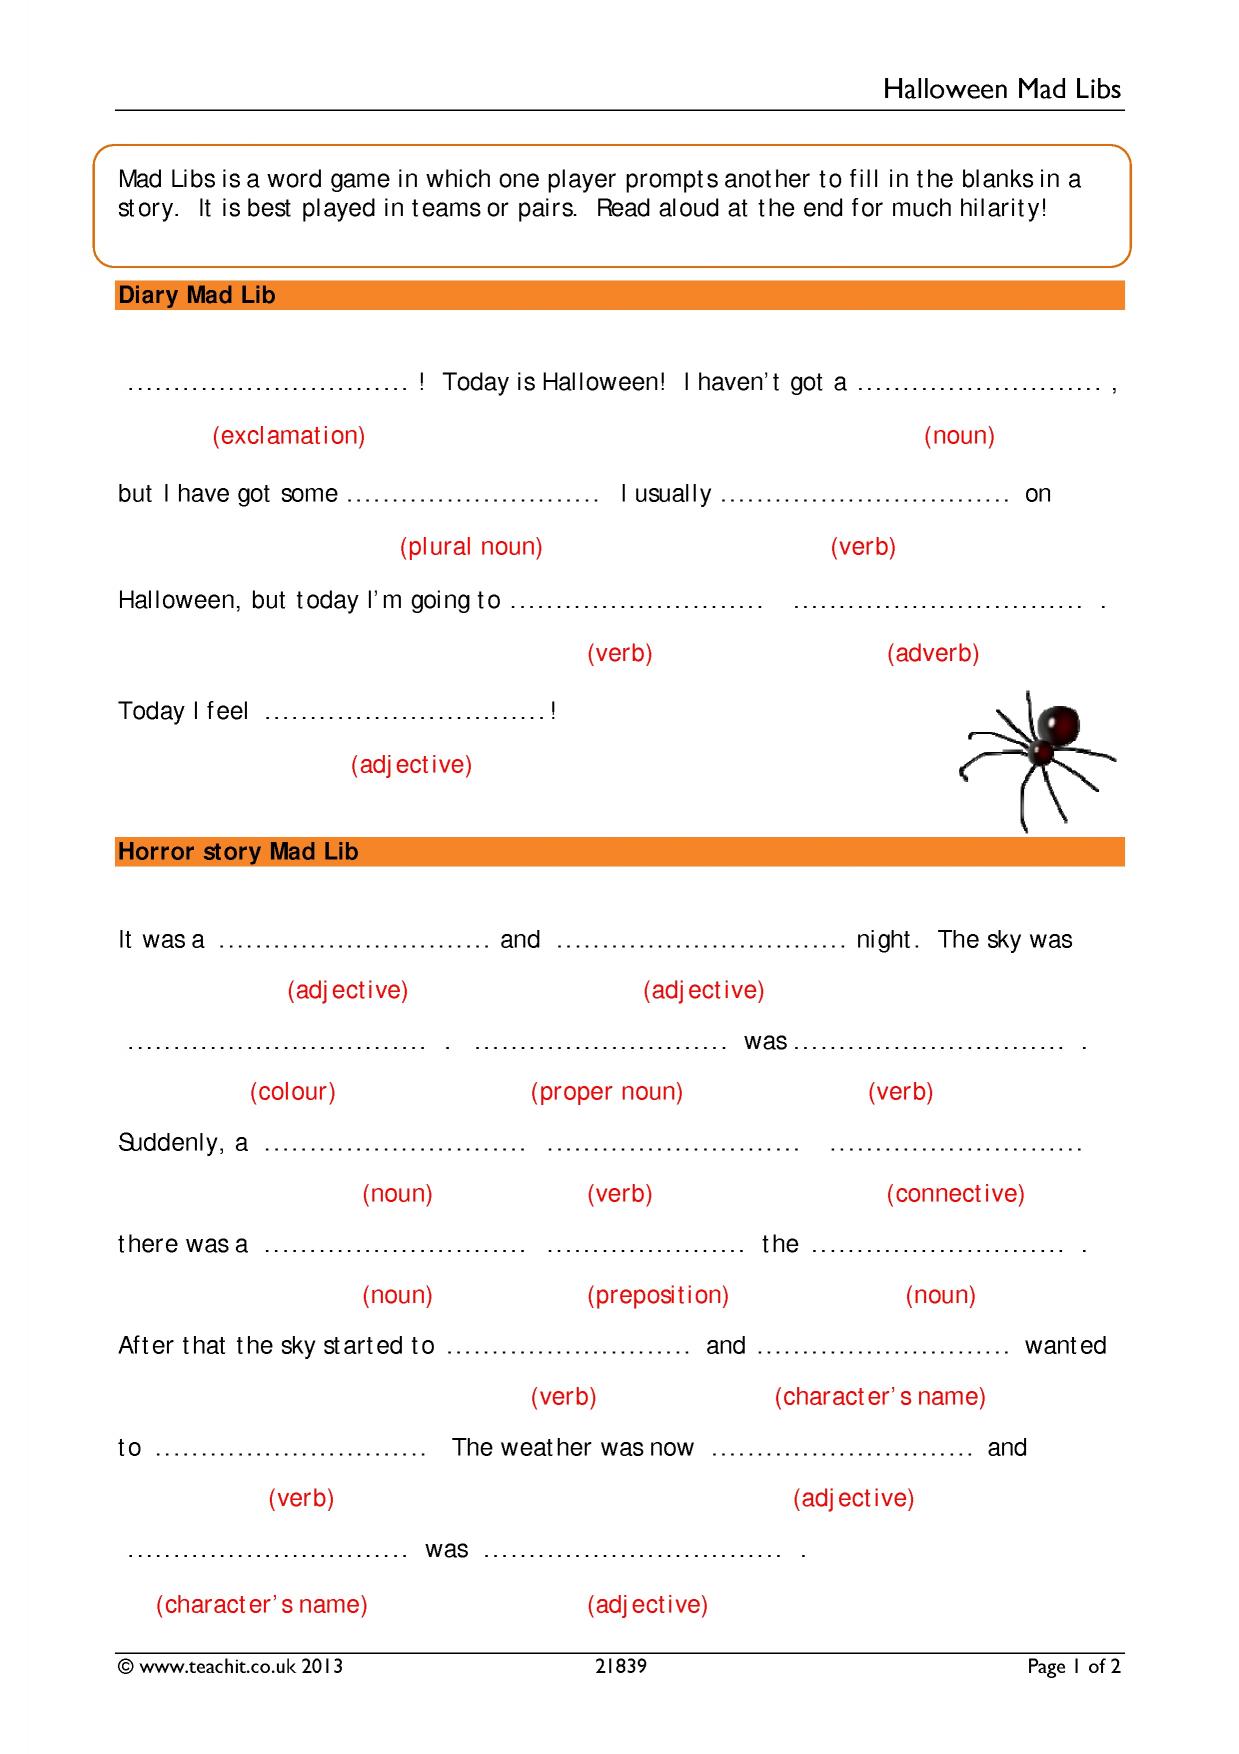 Word Classes KS4 Grammar And Vocabulary Key Stage 4 Resources